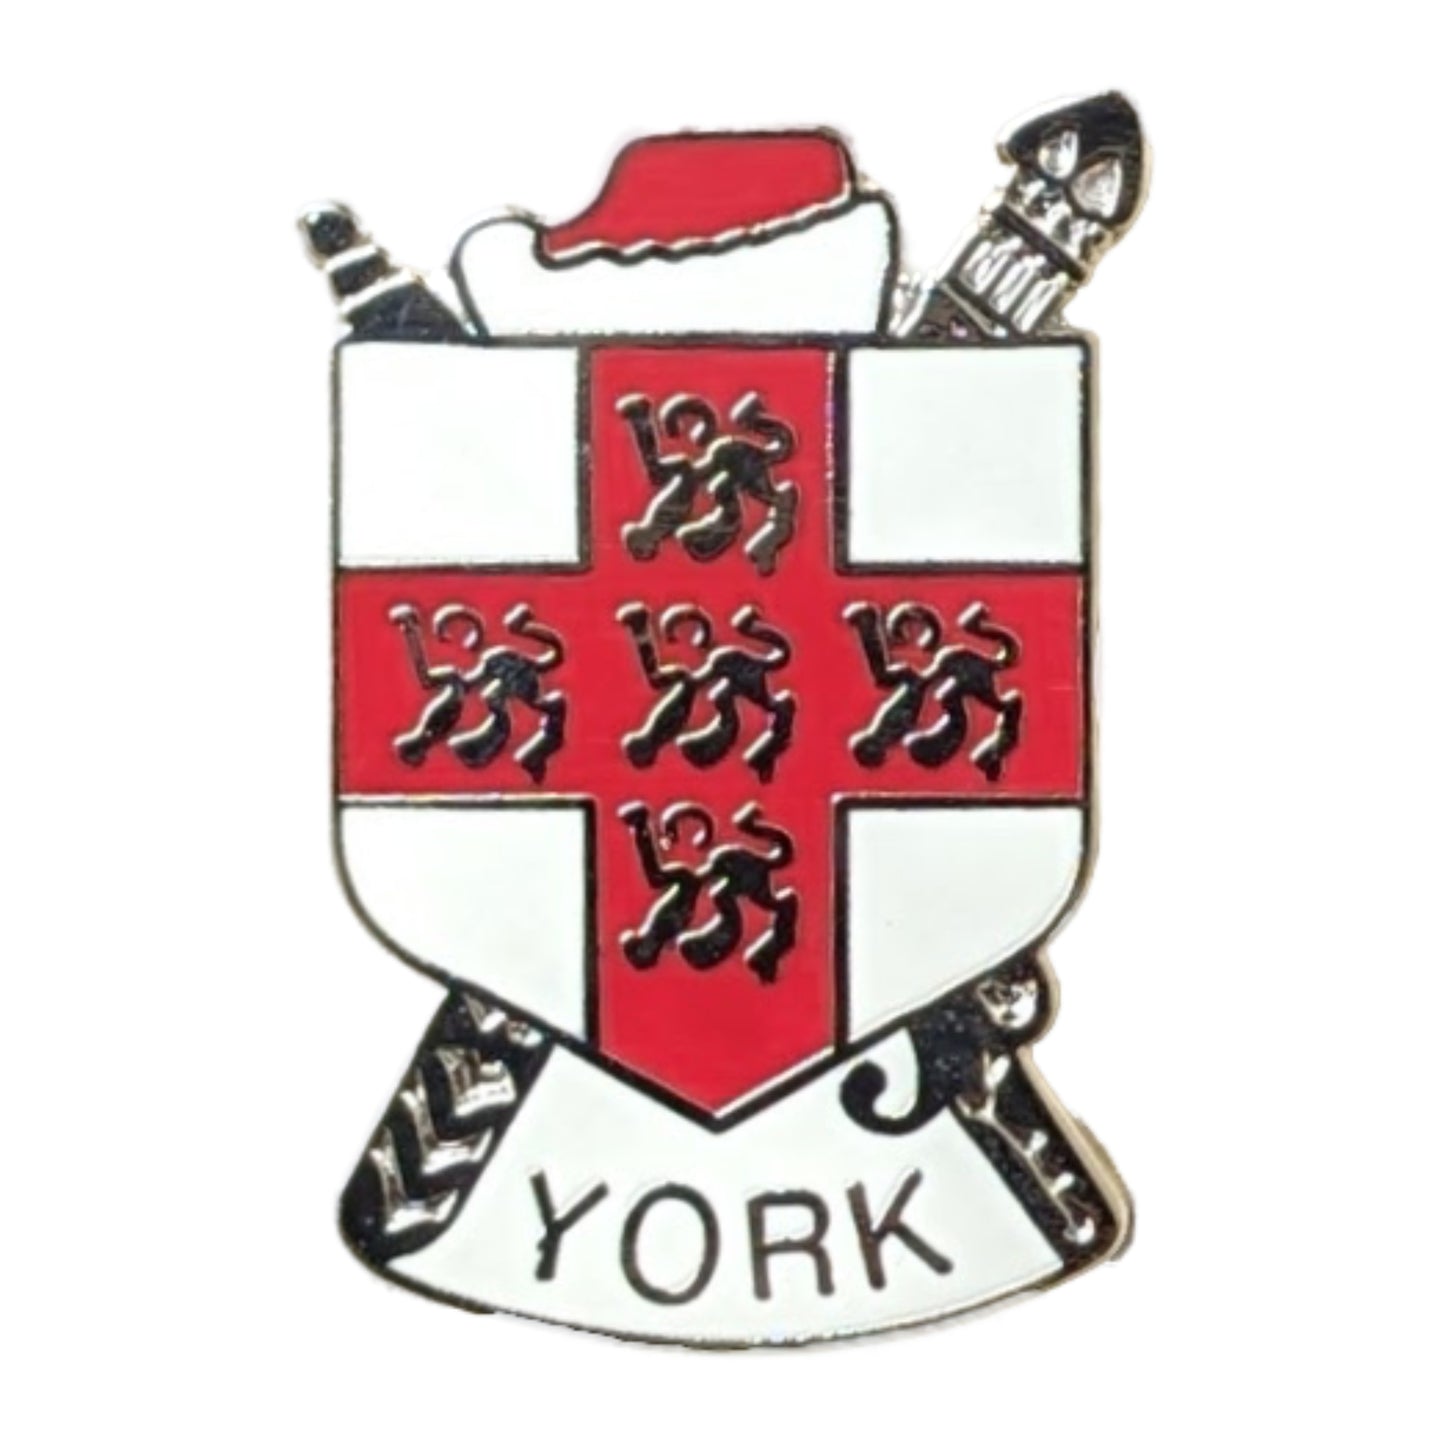 City of York Coat of Arms Pin Badge - The Great Yorkshire Shop